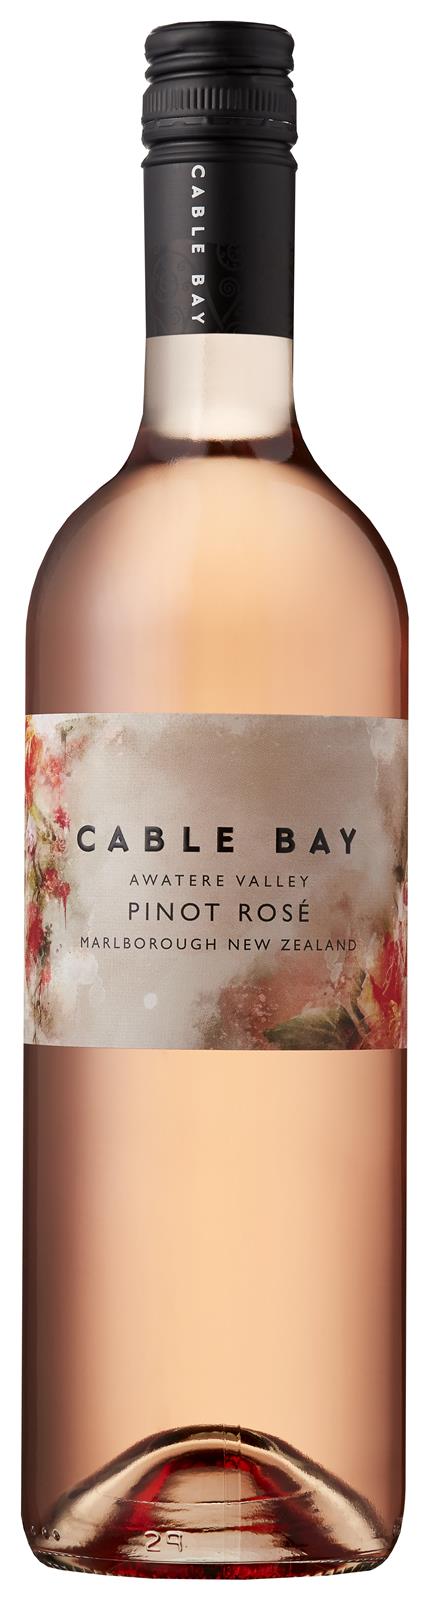 Cable Bay Awatere Valley Pinot Rosé 2019